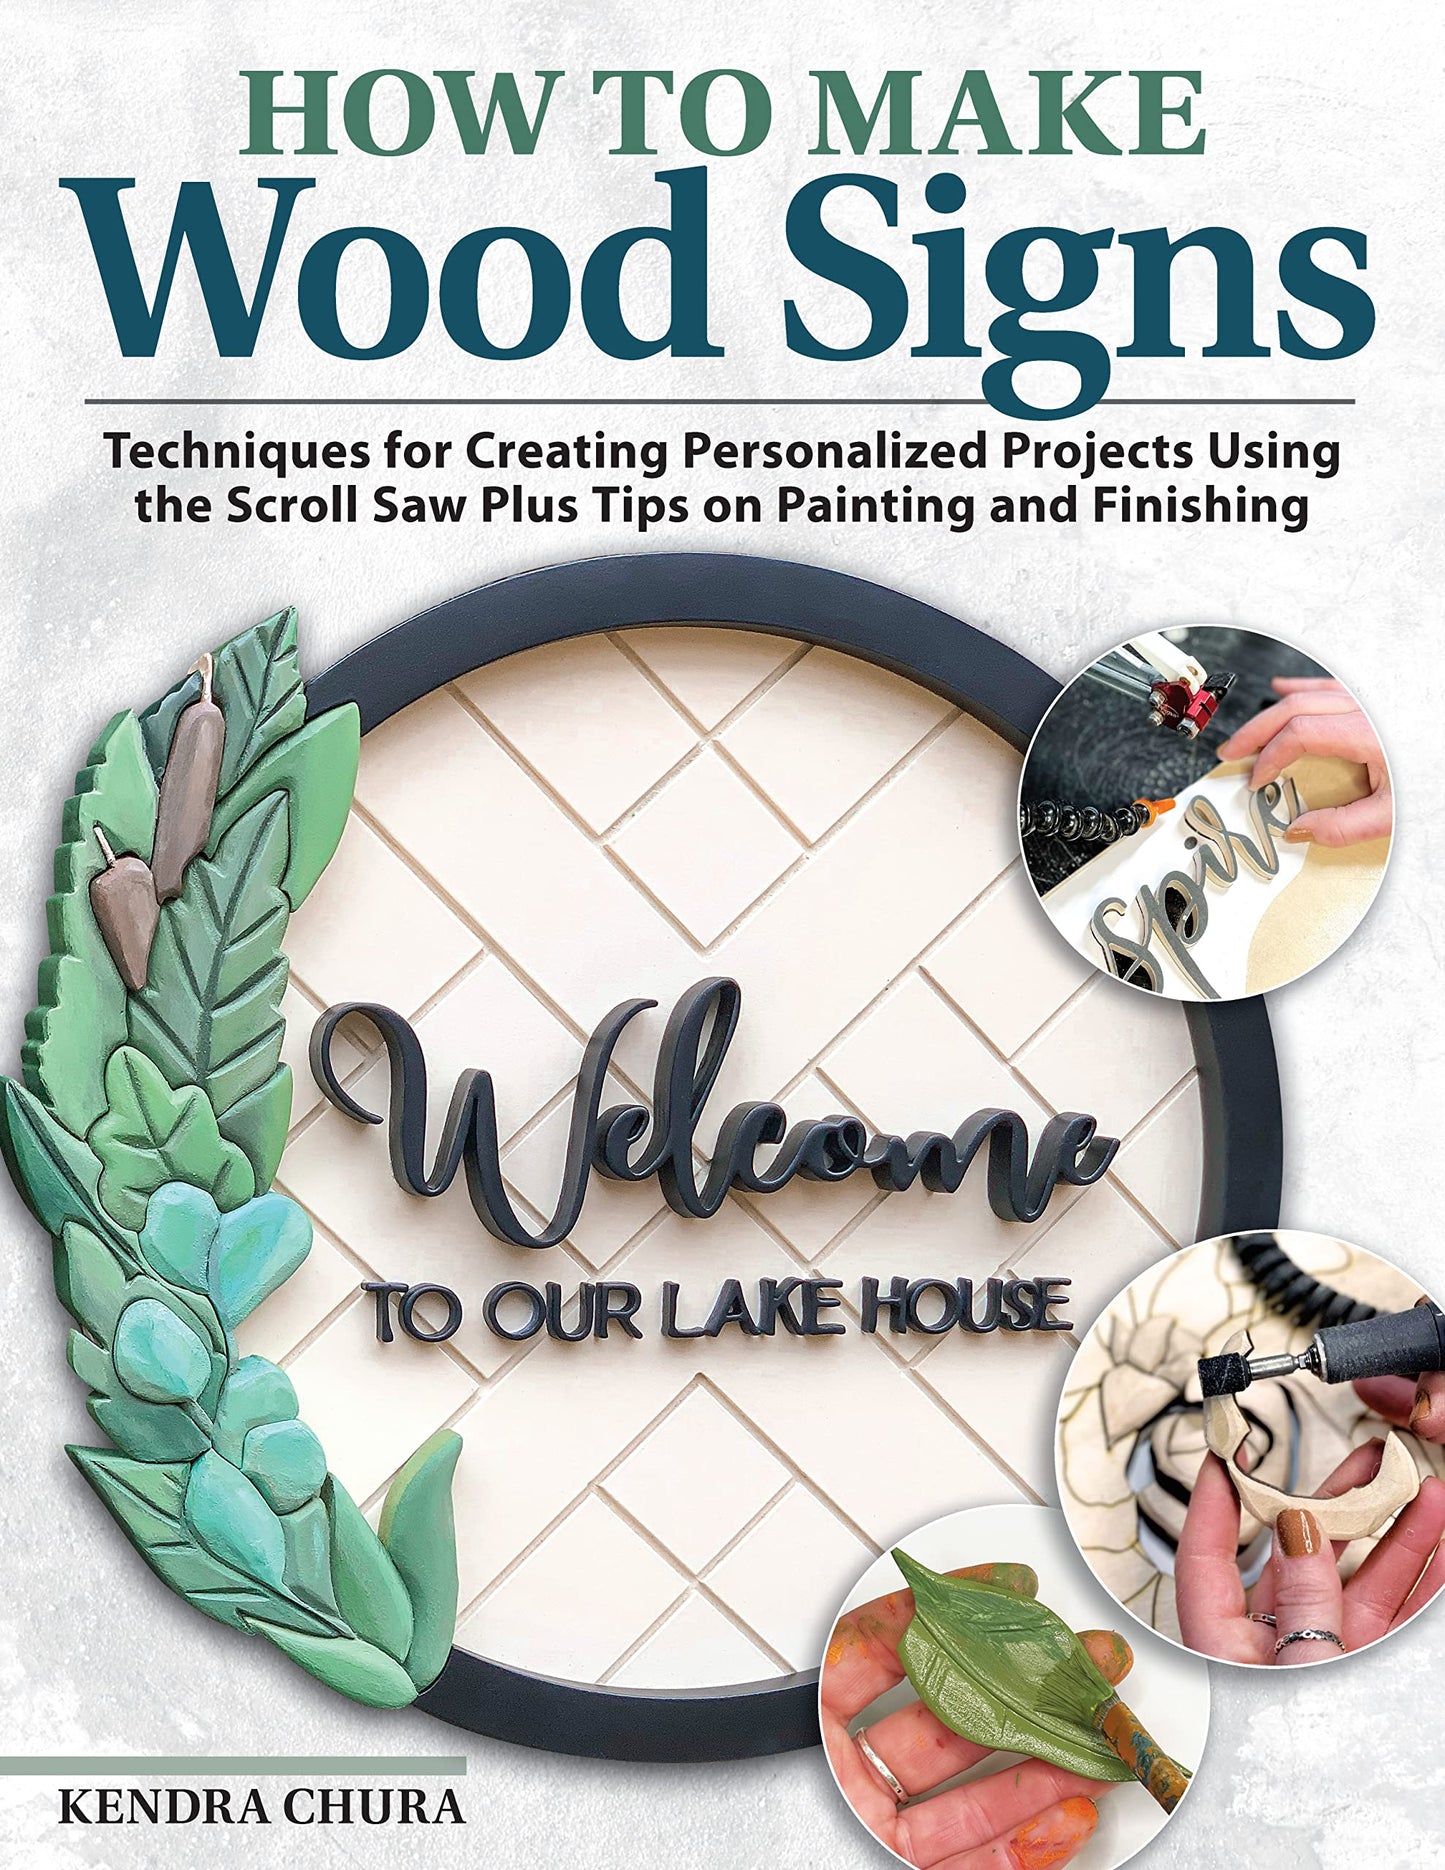 How to Make Wood Signs: Techniques for Creating Personalized Projects Using the Scroll Saw Plus Tips on Painting and Finishing (Fox Chapel